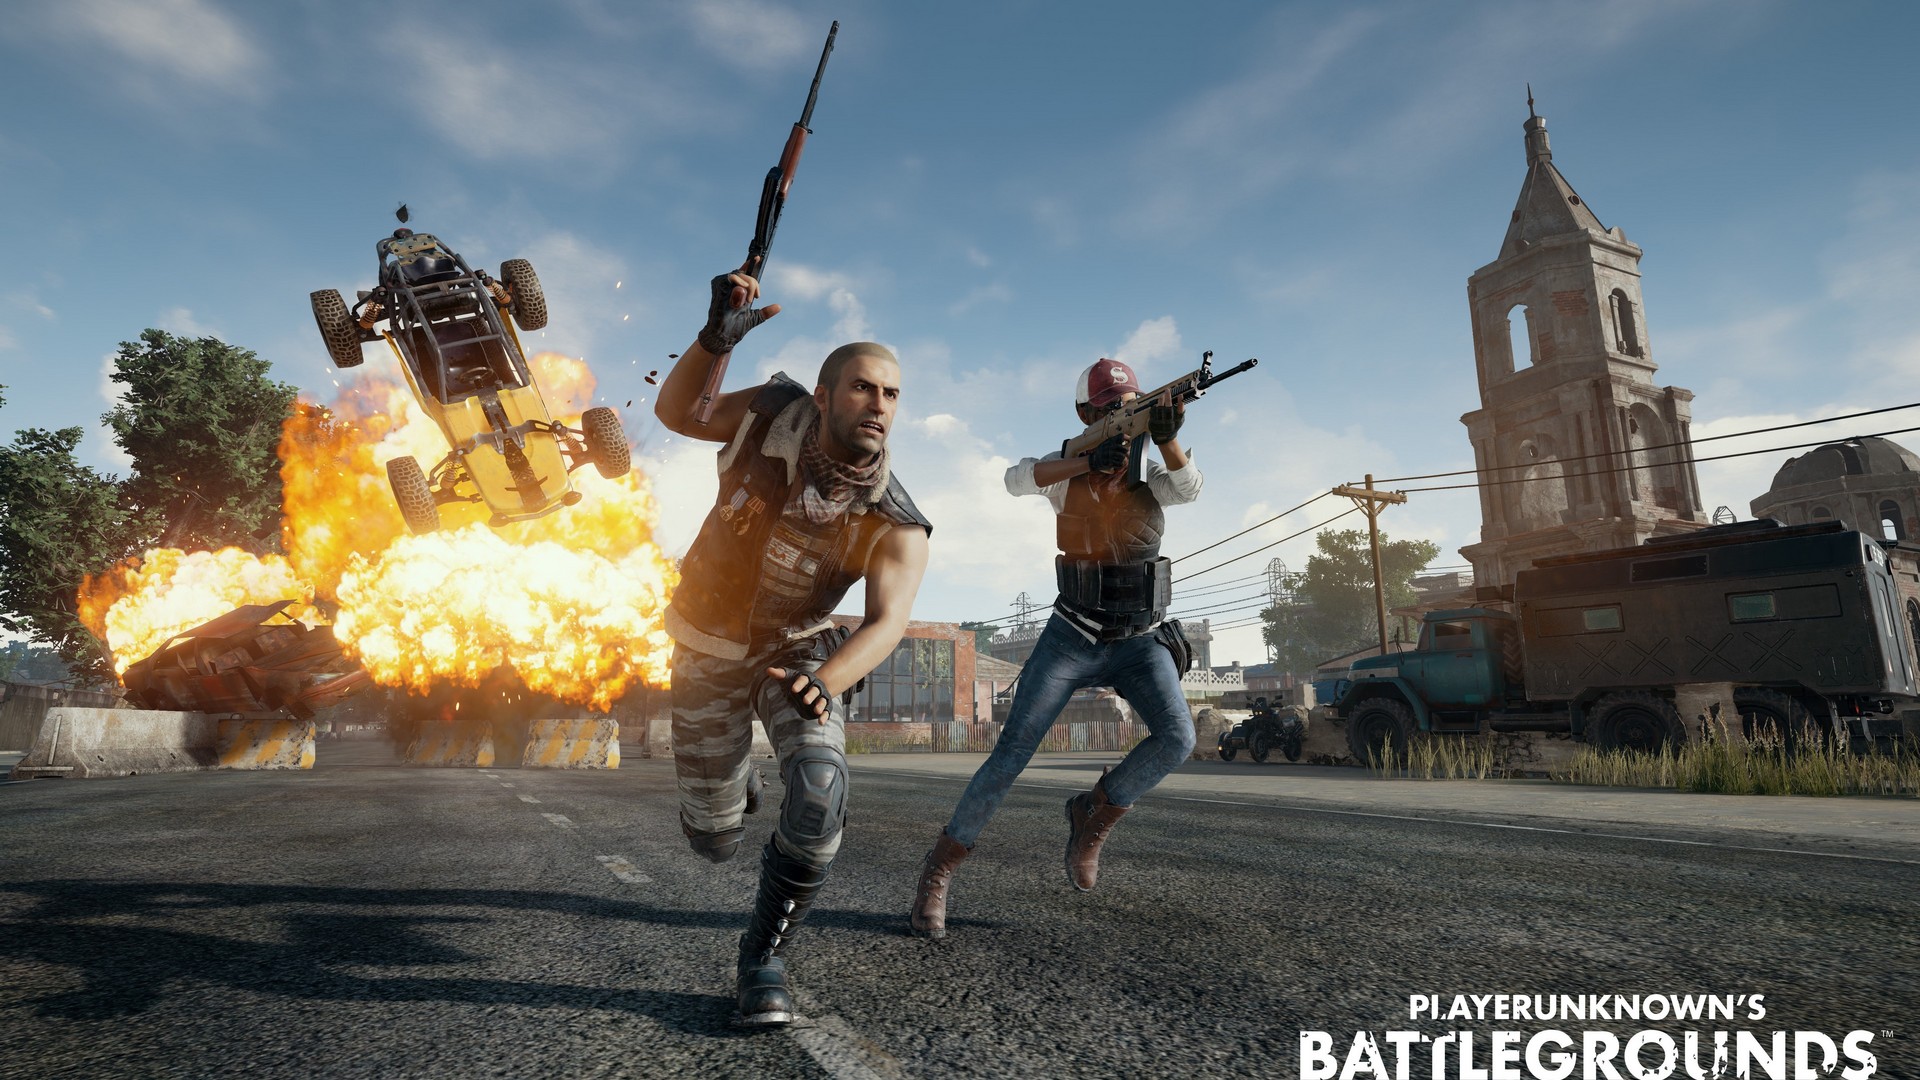 Wallpaper PUBG Xbox One Desktop with resolution 1920X1080 pixel. You can use this wallpaper as background for your desktop Computer Screensavers, Android or iPhone smartphones